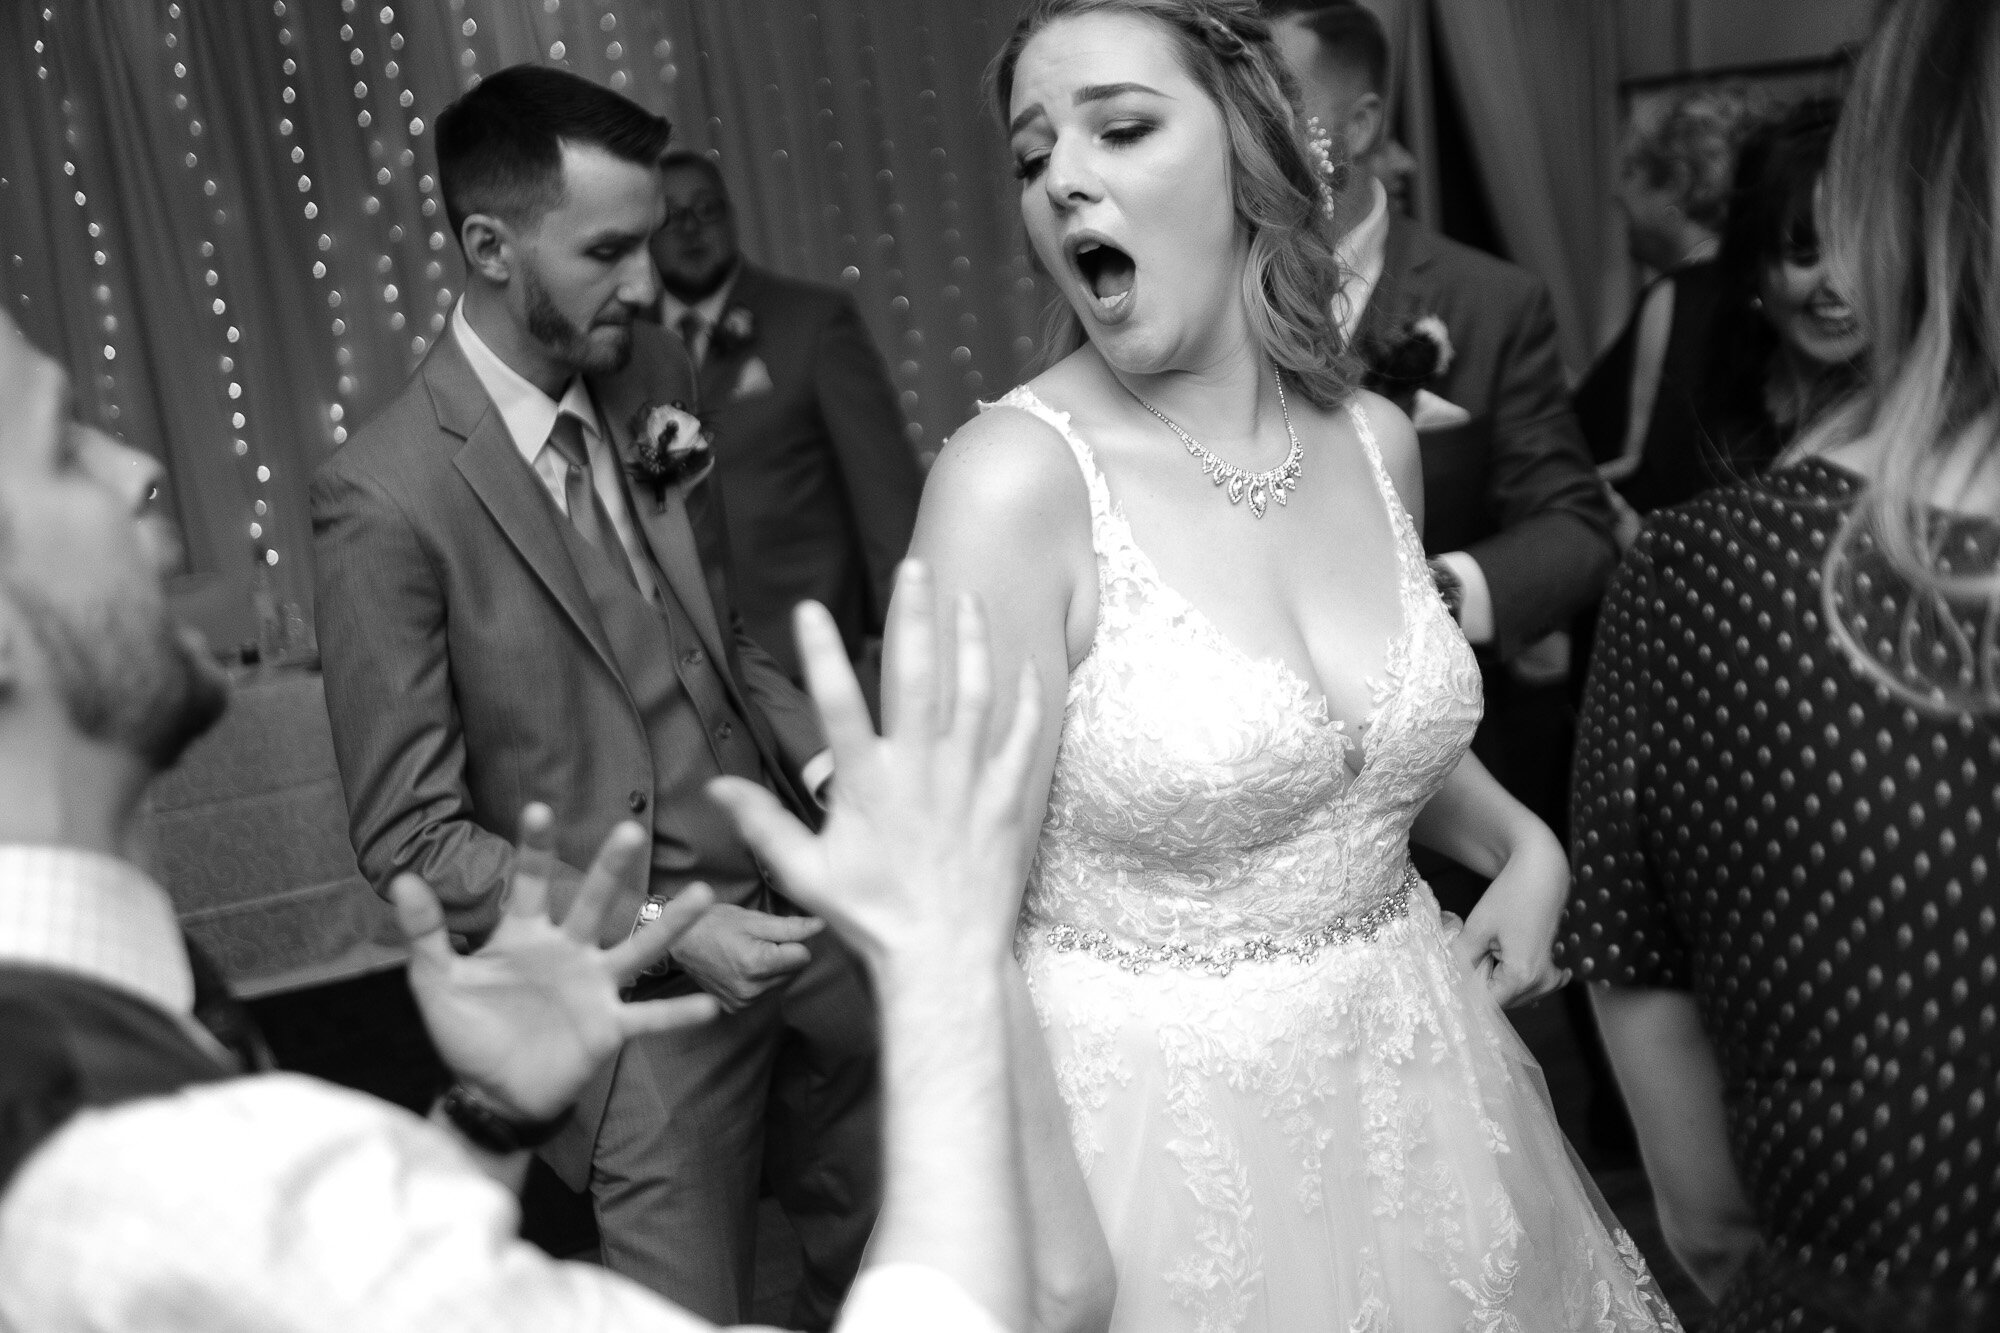  The bride cuts loose on the dance floor during the wedding reception at the Three Bridges event centre located outside of Waterloo, Ontario. Photograph by Toronto wedding photographer Scott Williams. 